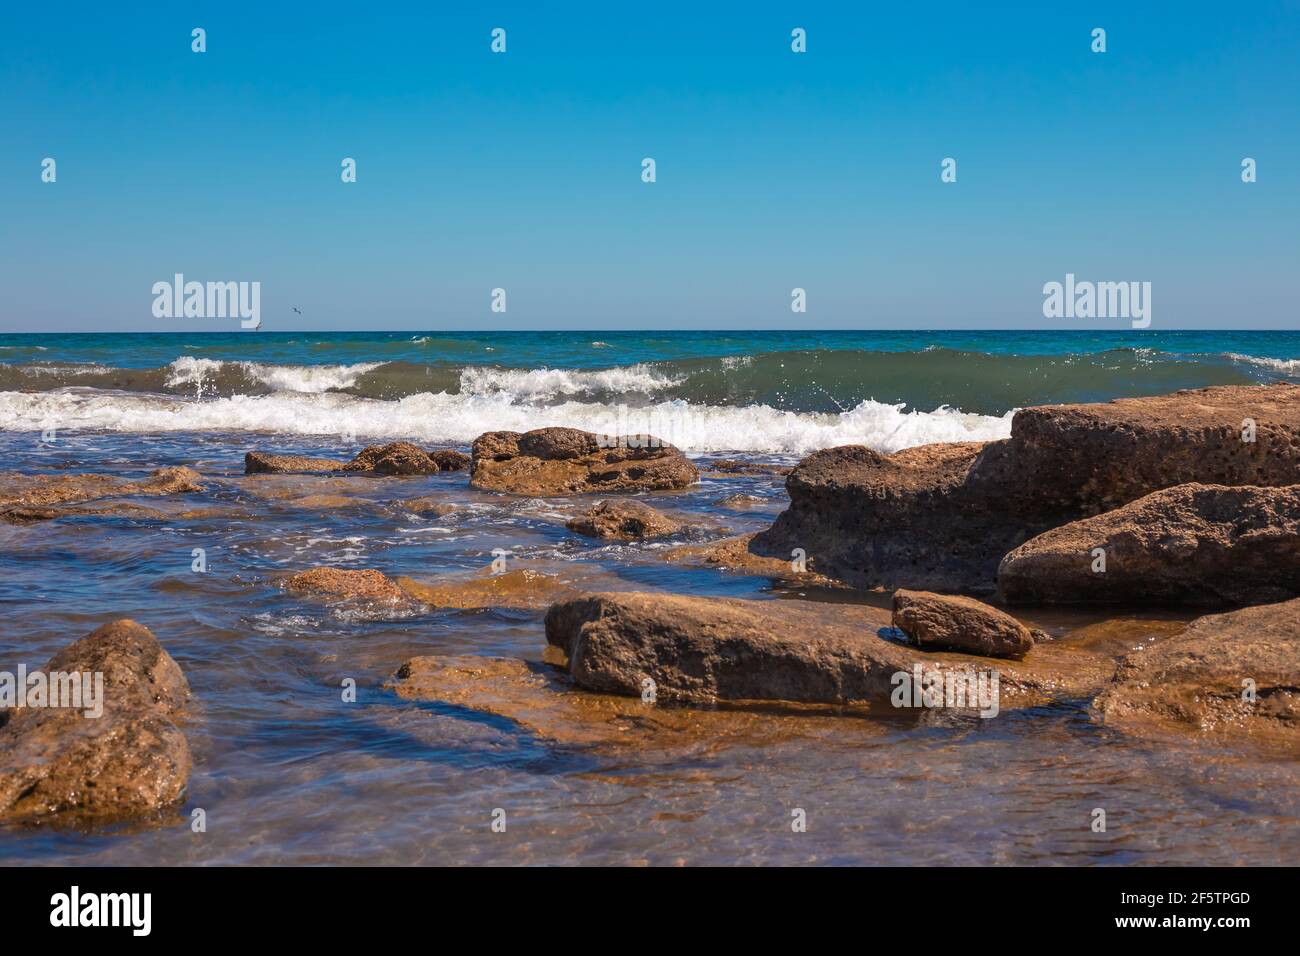 Seashore with a blue wave beating against the stones on the beach. Sea sunny summer landscape. Stock Photo